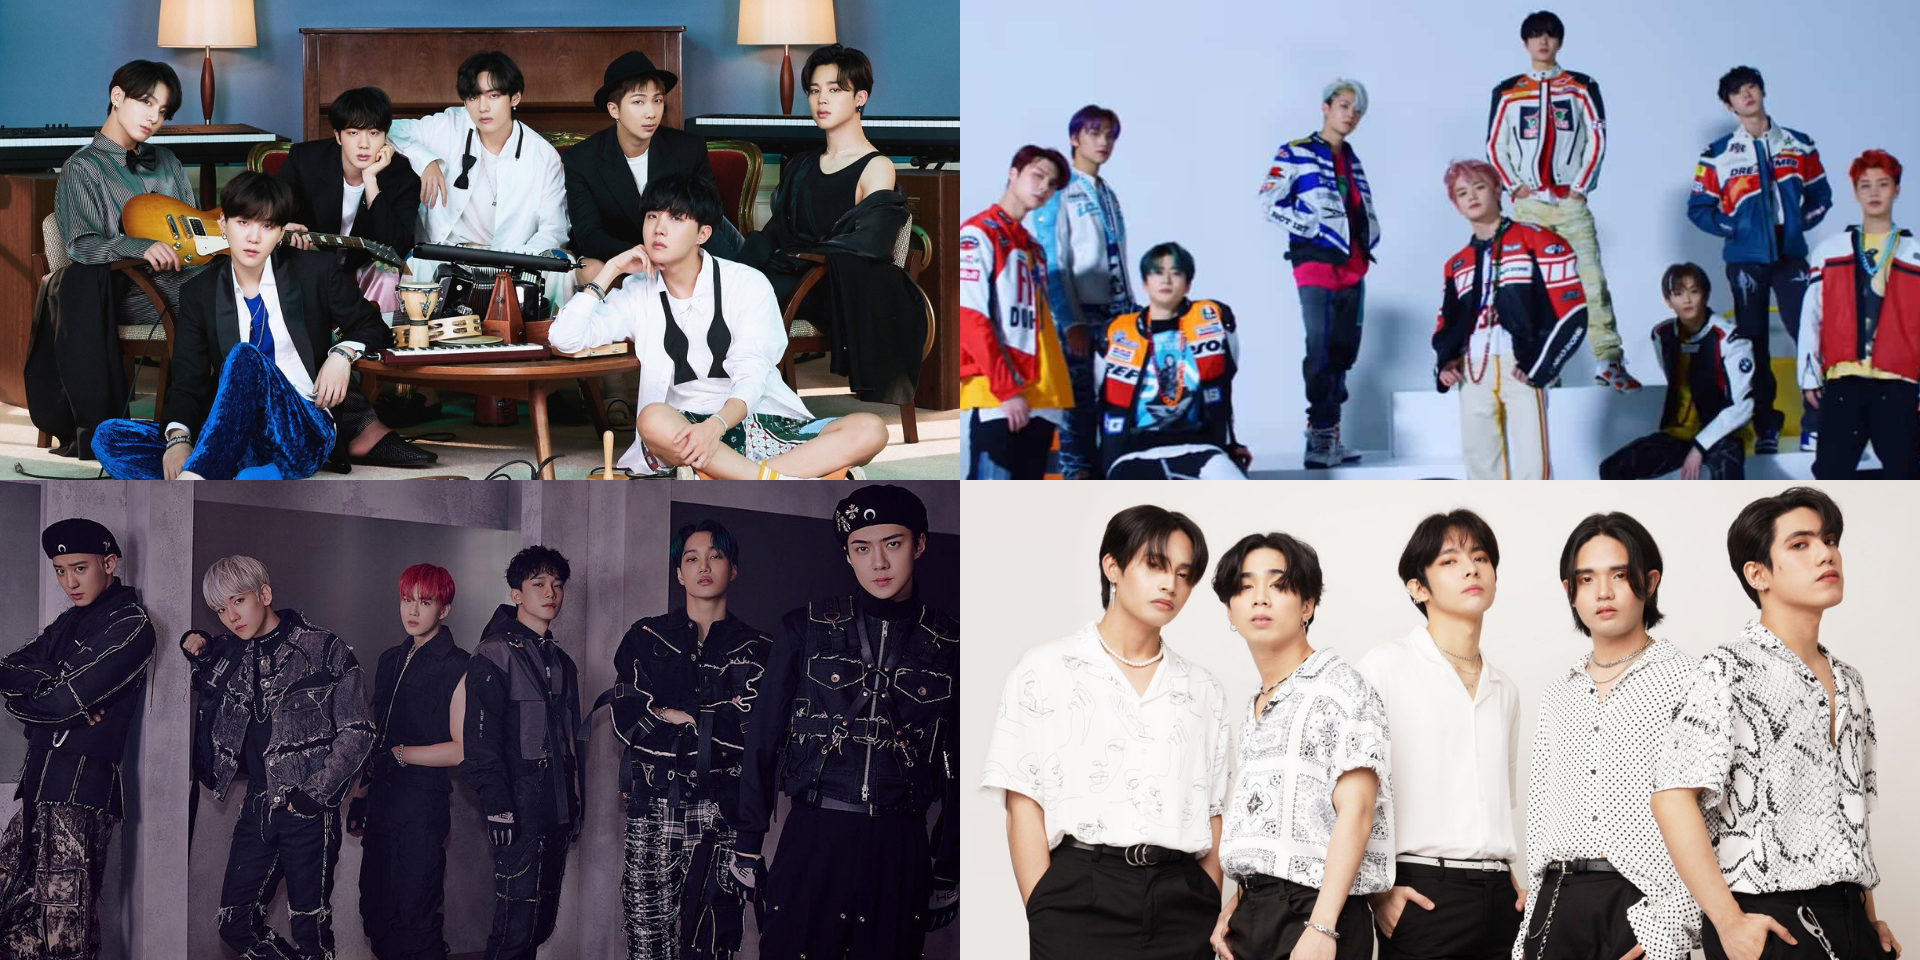 Bts Exo Nct127 Sb19 And More Land On Billboard S Top Social 50